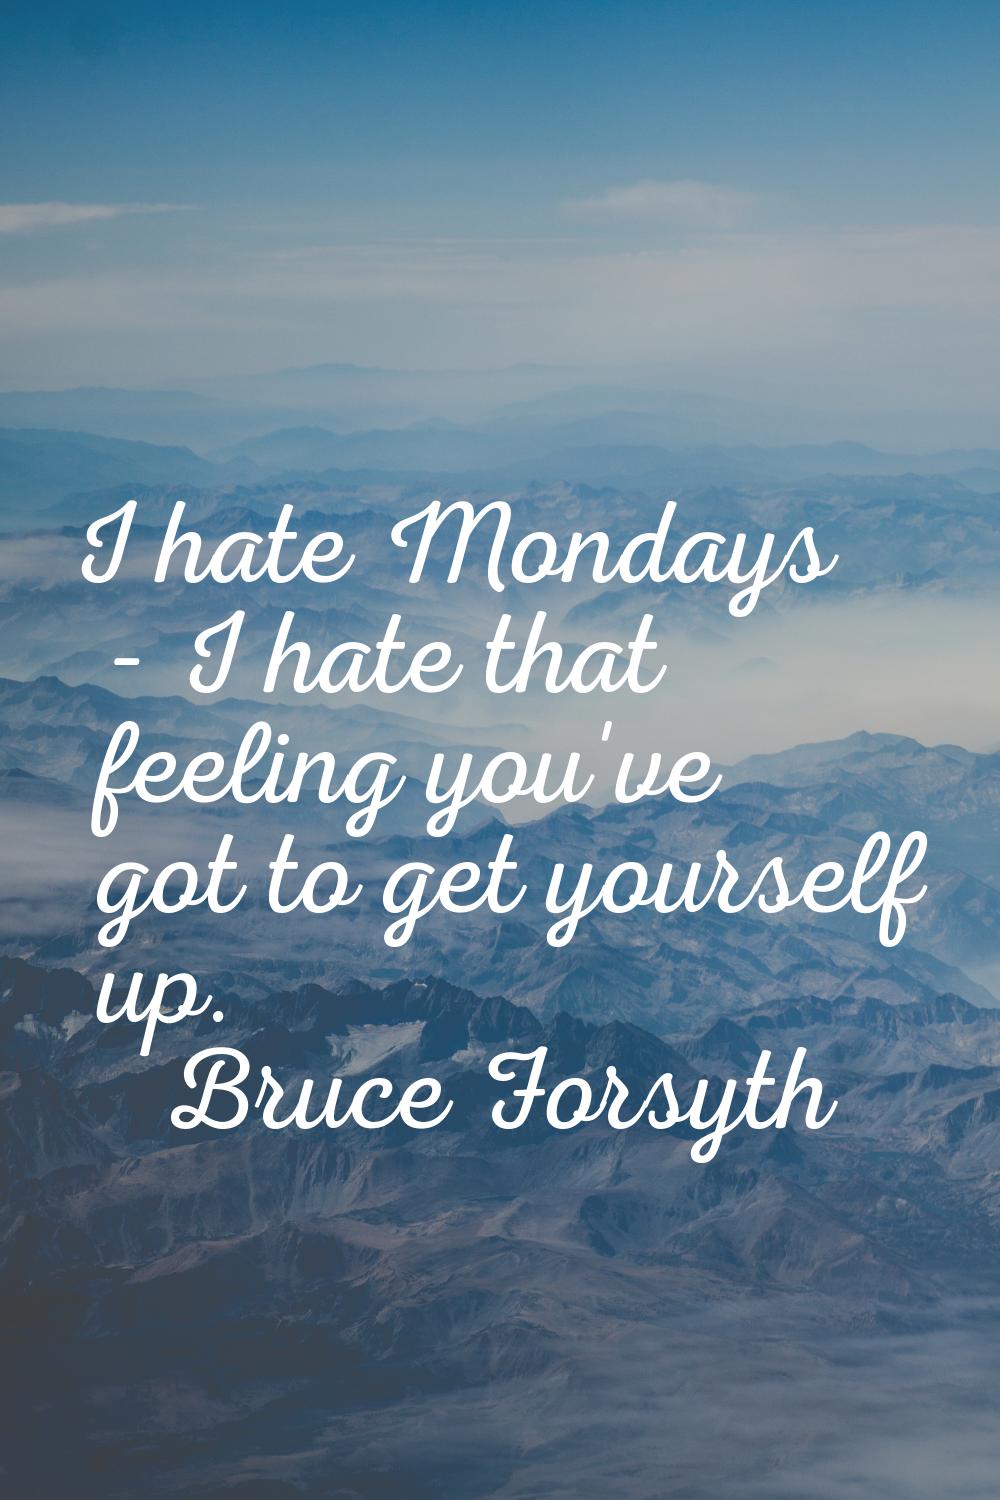 I hate Mondays - I hate that feeling you've got to get yourself up.